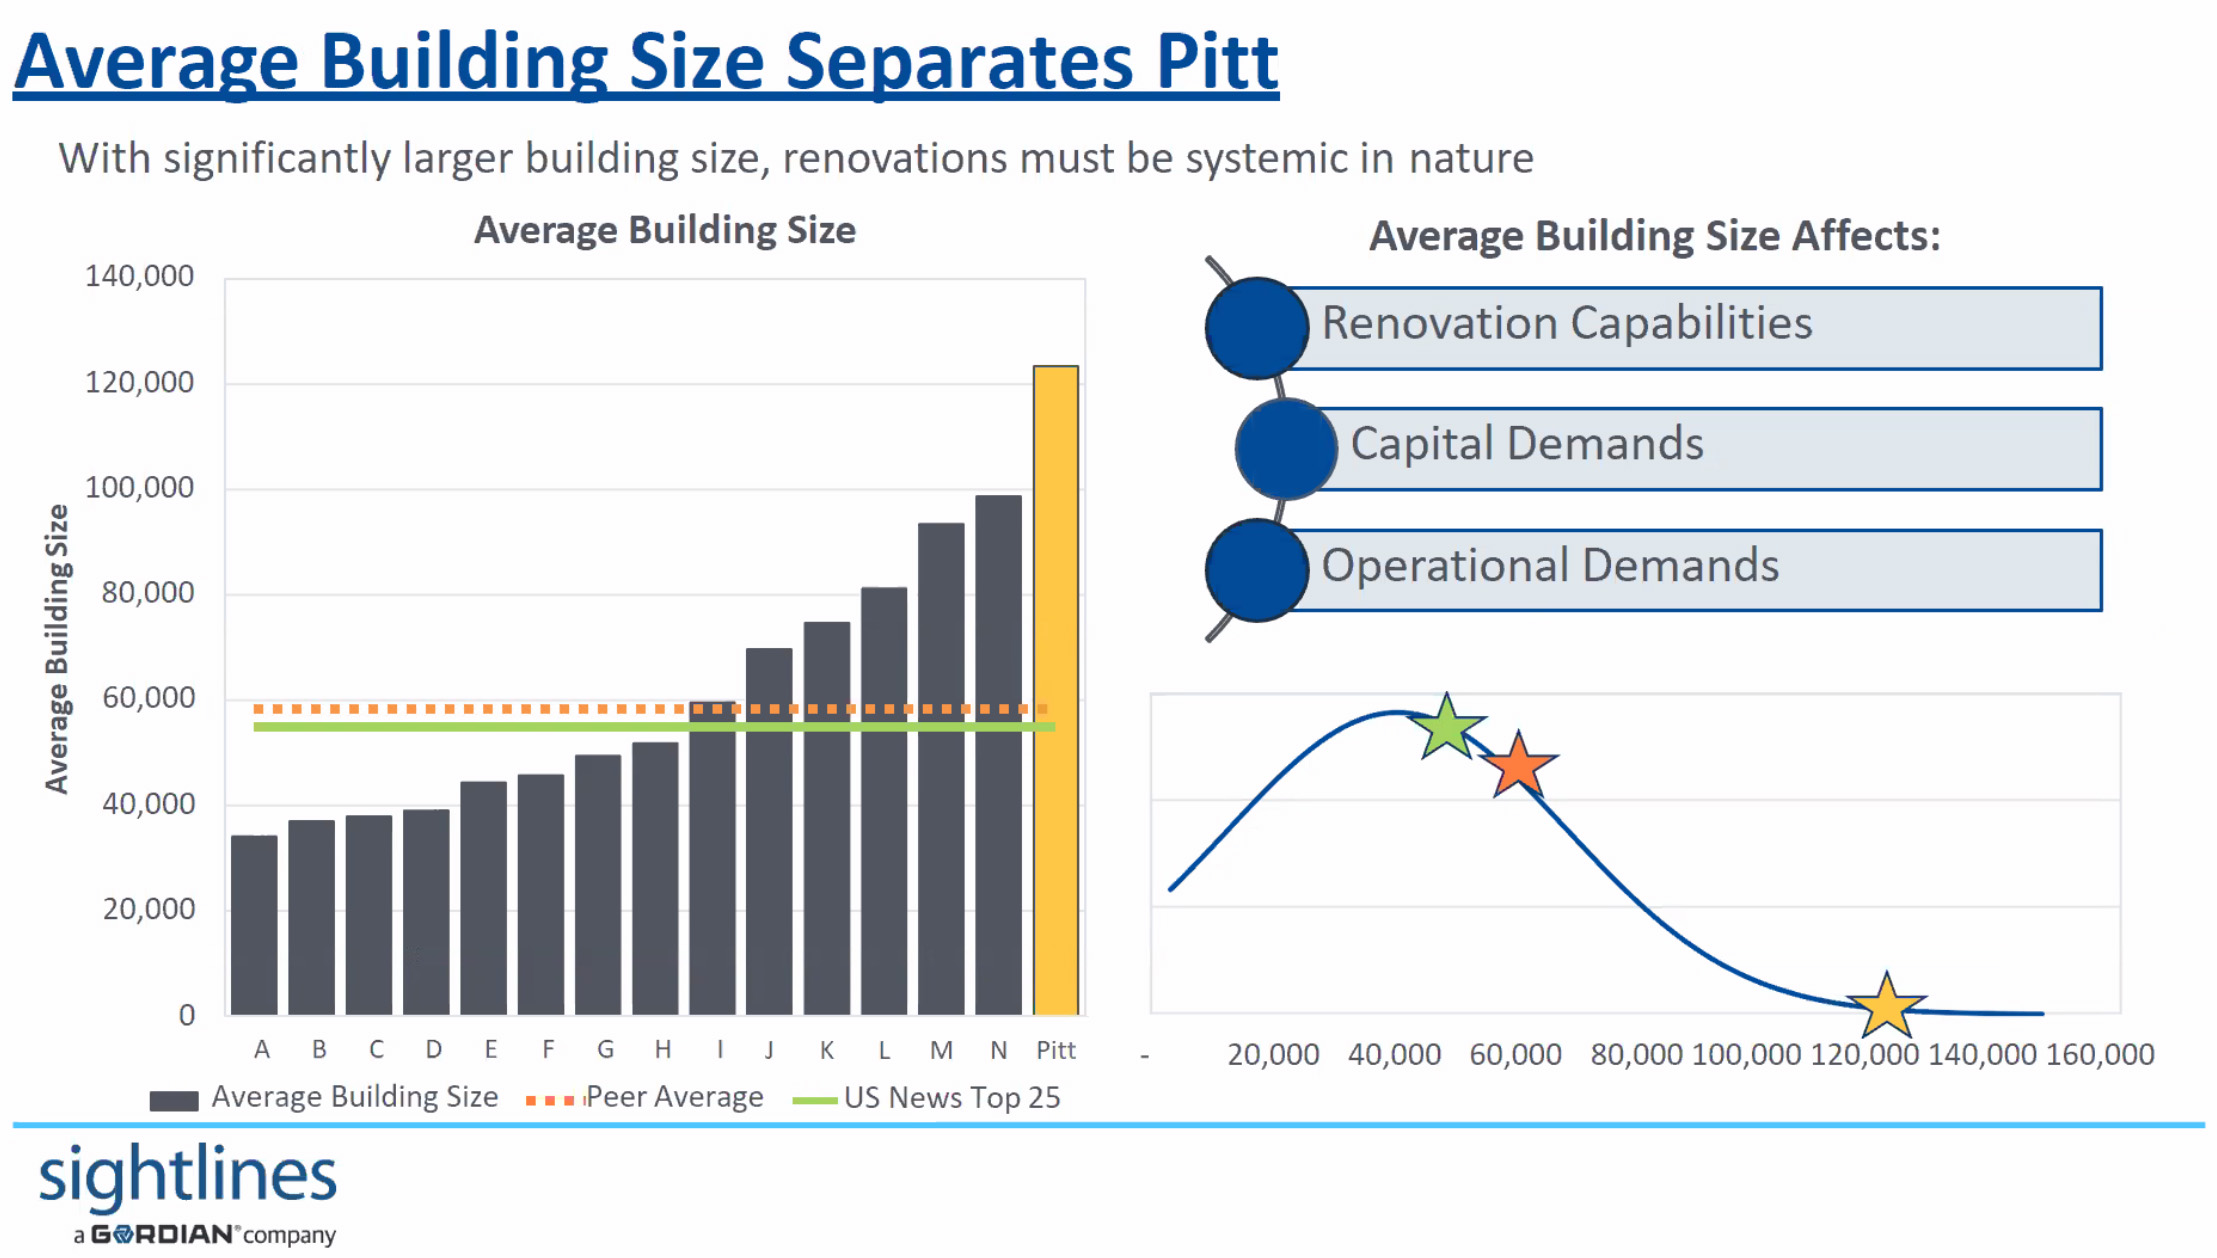 Chart showing Pitt building size compared to peer institutions